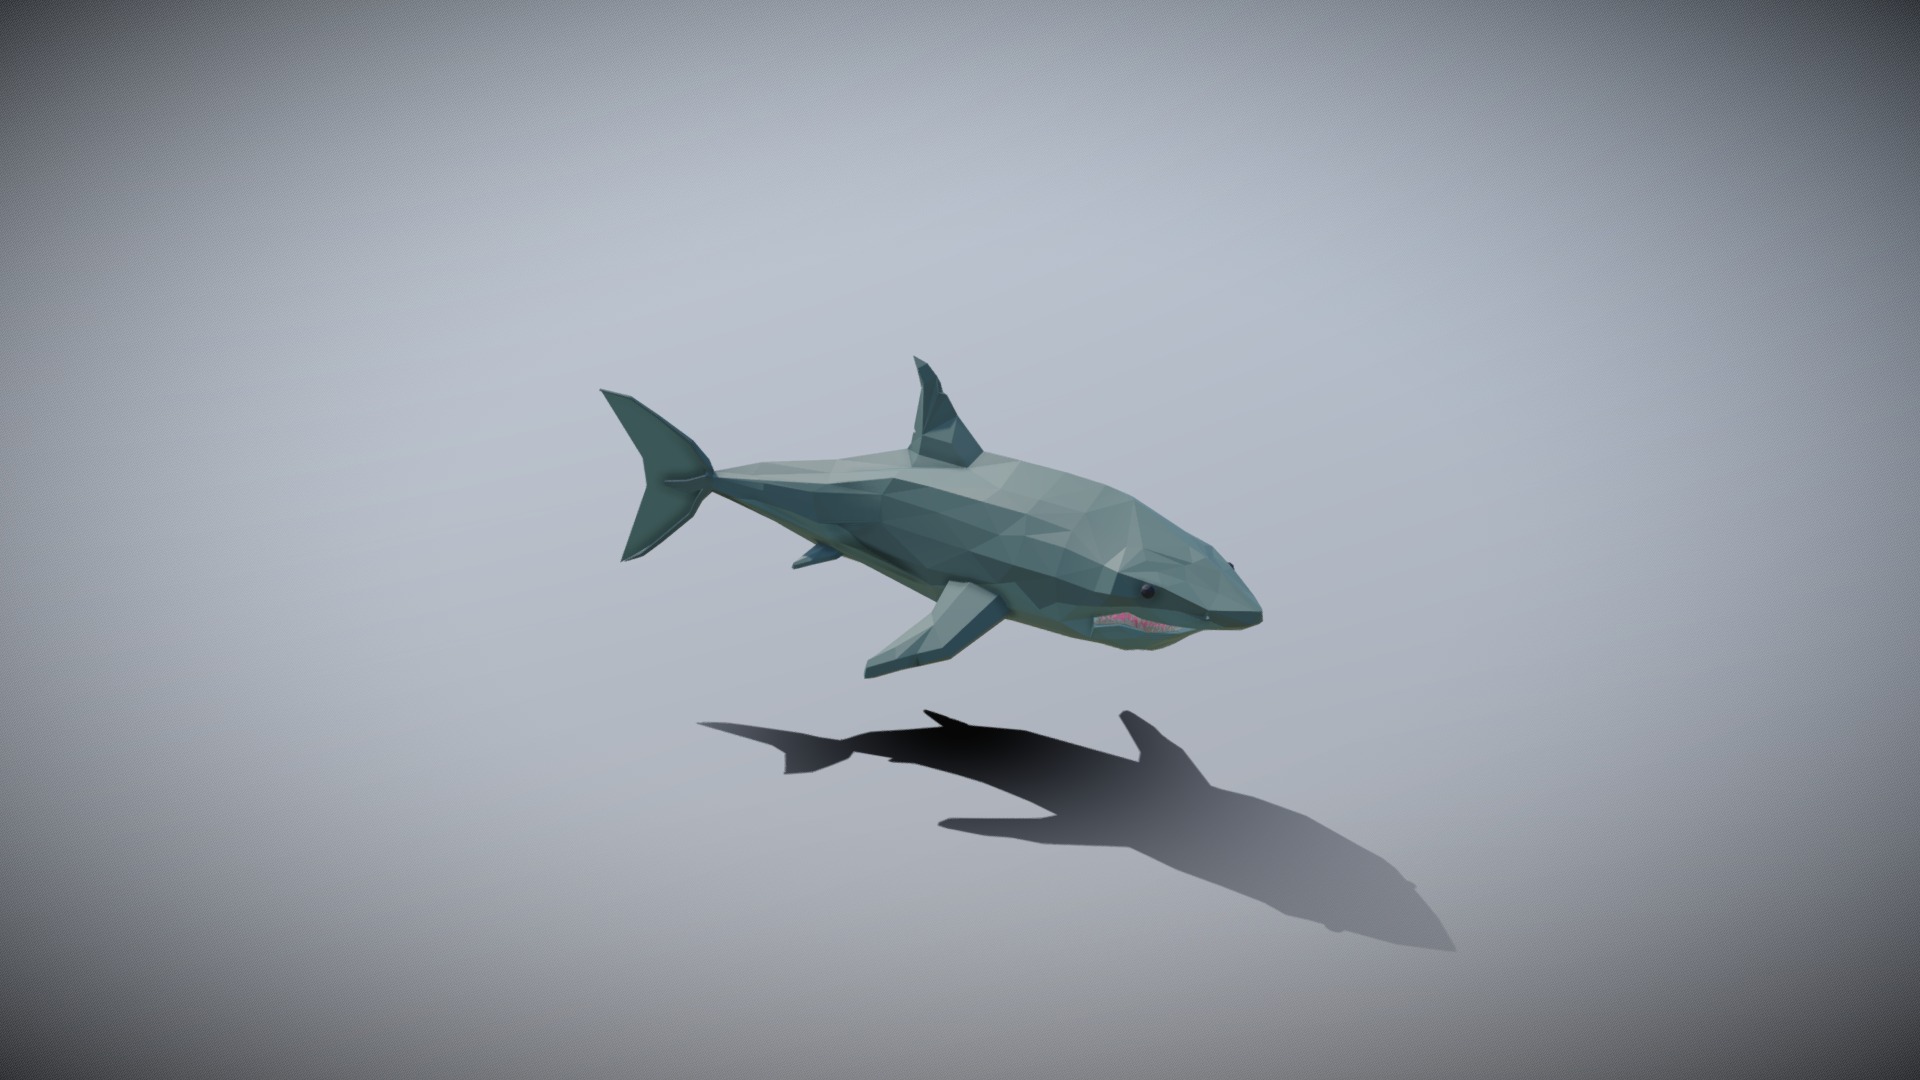 3D model Low Poly Shark - This is a 3D model of the Low Poly Shark. The 3D model is about a couple of airplanes flying in the sky.